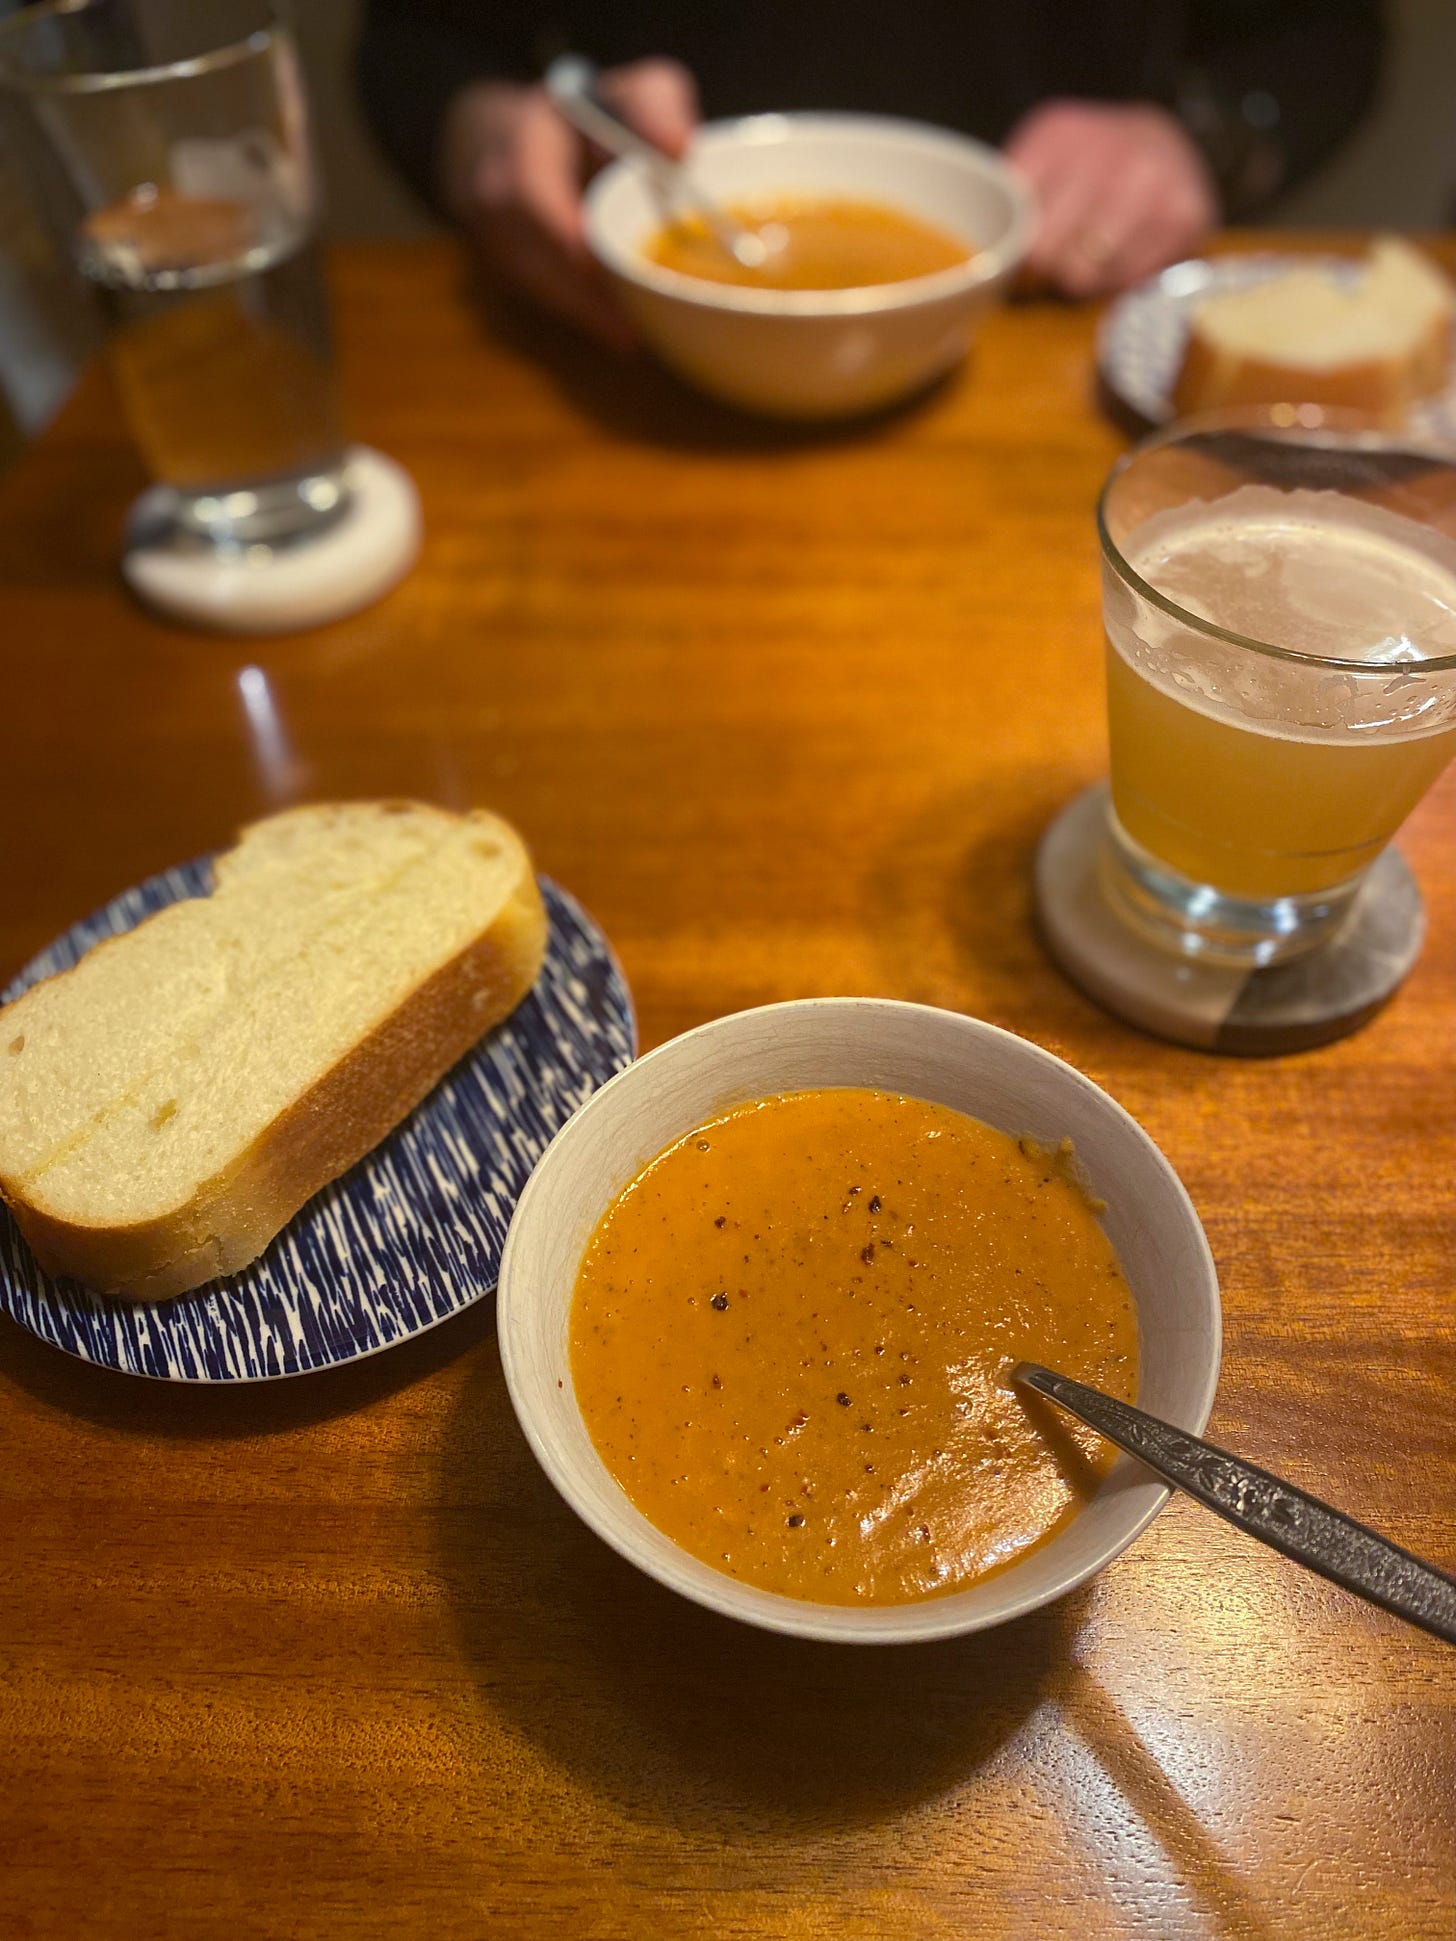 A small white bowl of the tomato red lentil soup described above, with a spoon in it. On a blue and white plate to the left is a slice of garlic bread, and to the right is a glass of IPA. The same meal sits in front of Jeff on the opposite side of the table. His hand curls around the edge of his bowl.